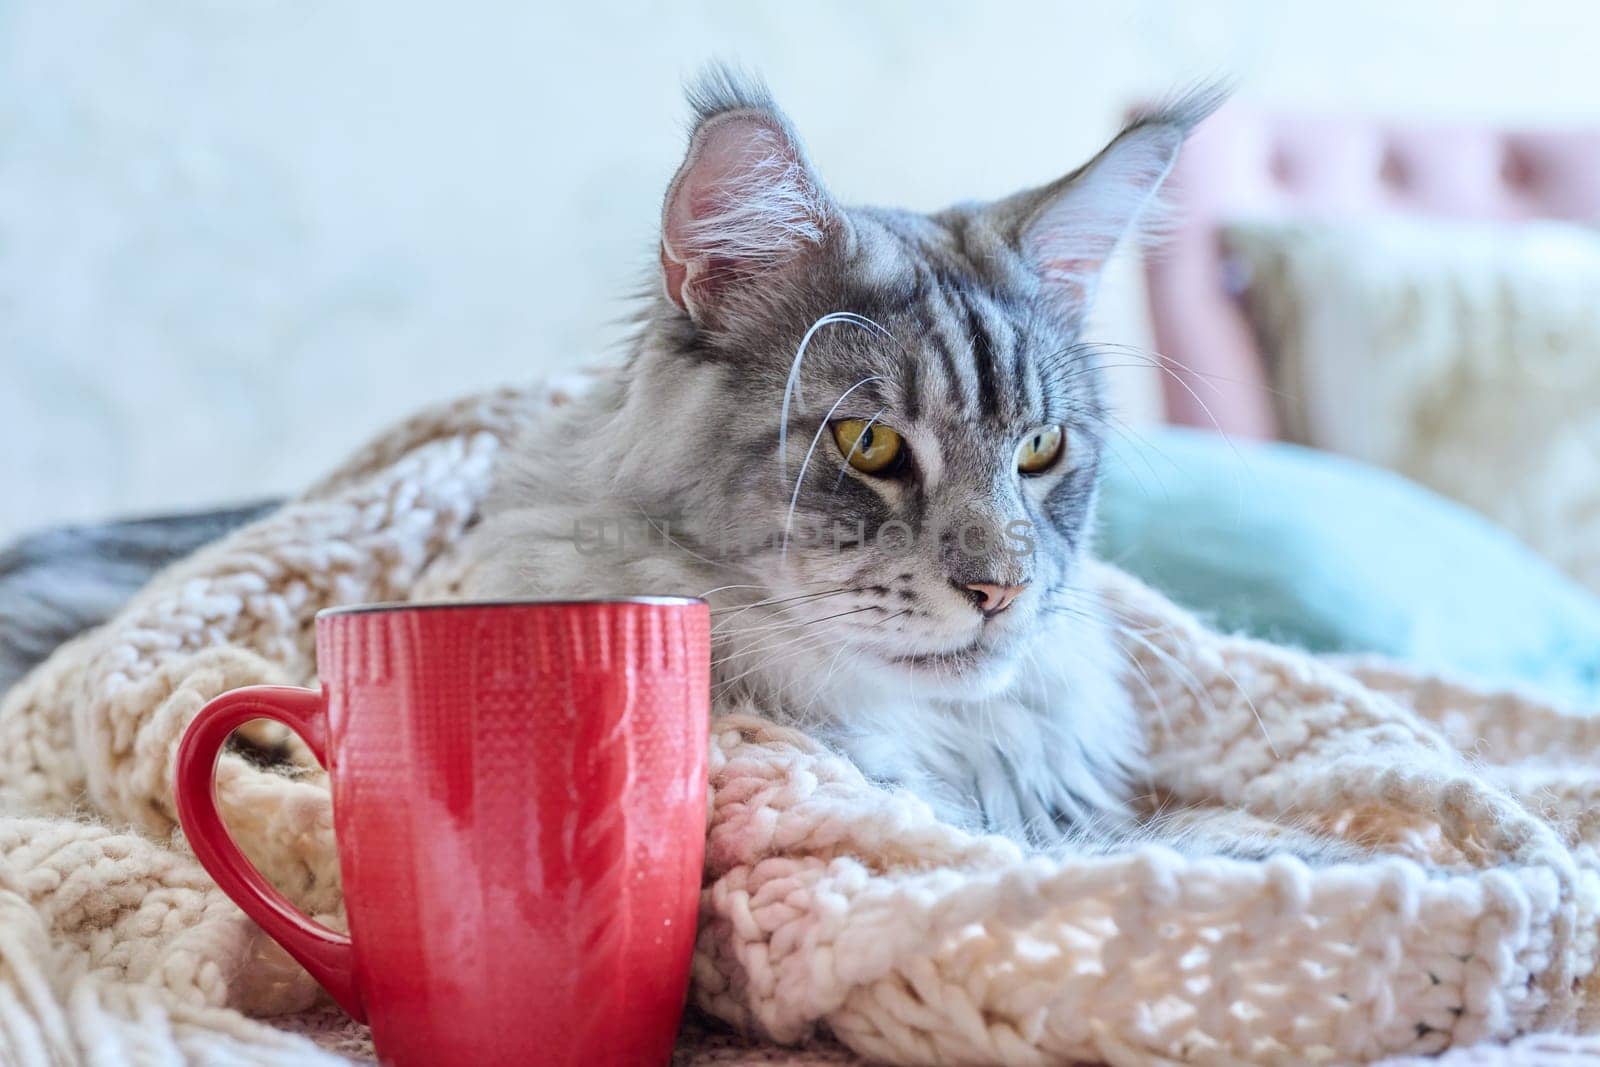 Winter portrait of fluffy gray cat lying in woolen warm clothes with mug. Cold season, autumn winter, relax, energy crisis, saving energy resources, warmth, comfort concept